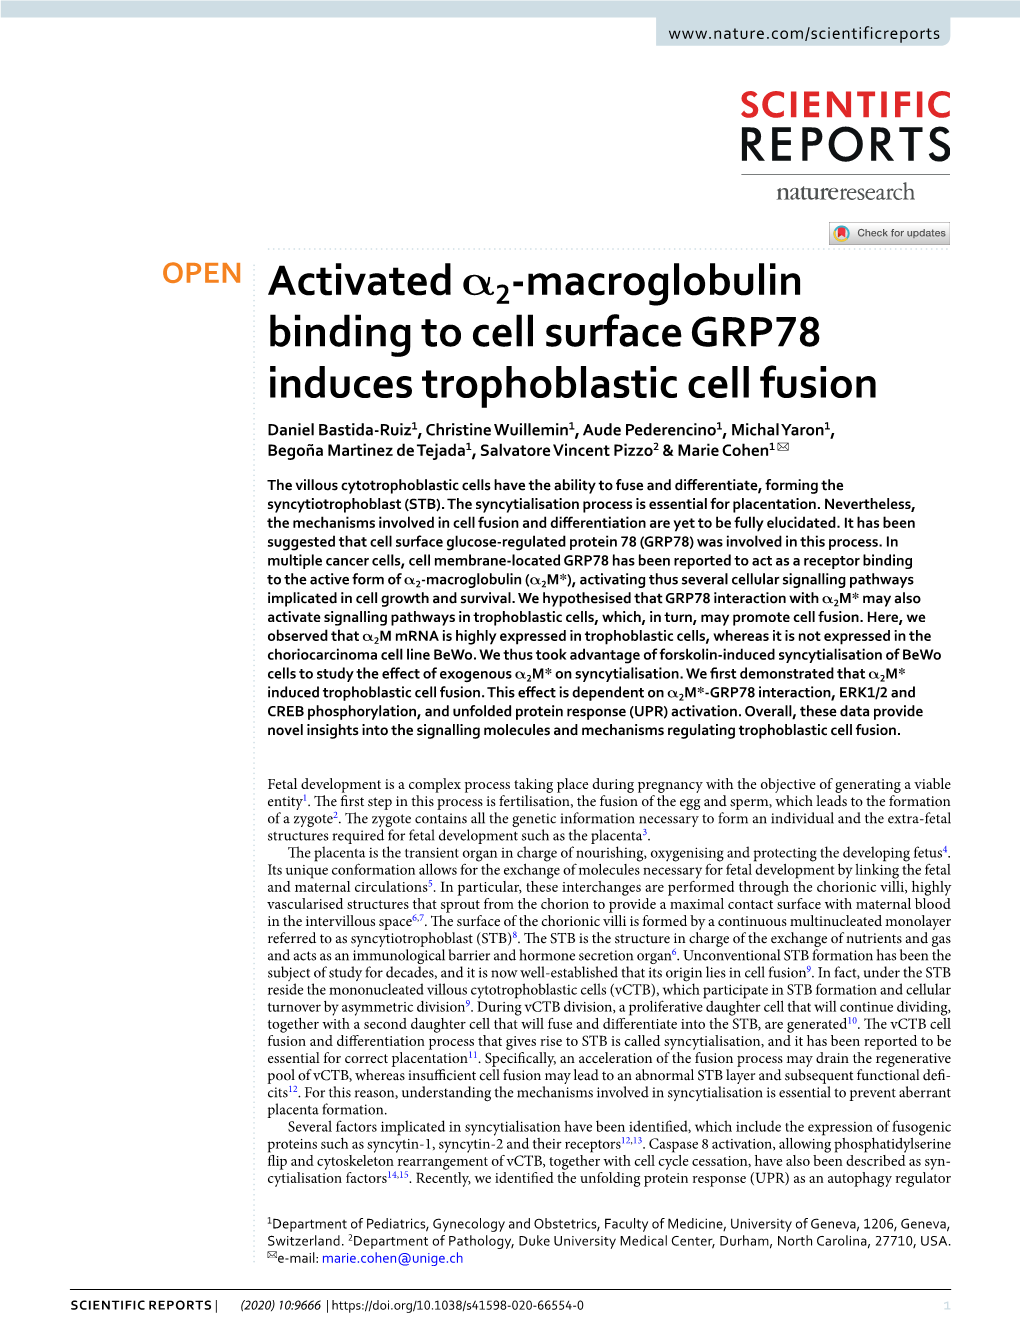 Activated Α2-Macroglobulin Binding to Cell Surface GRP78 Induces Trophoblastic Cell Fusion